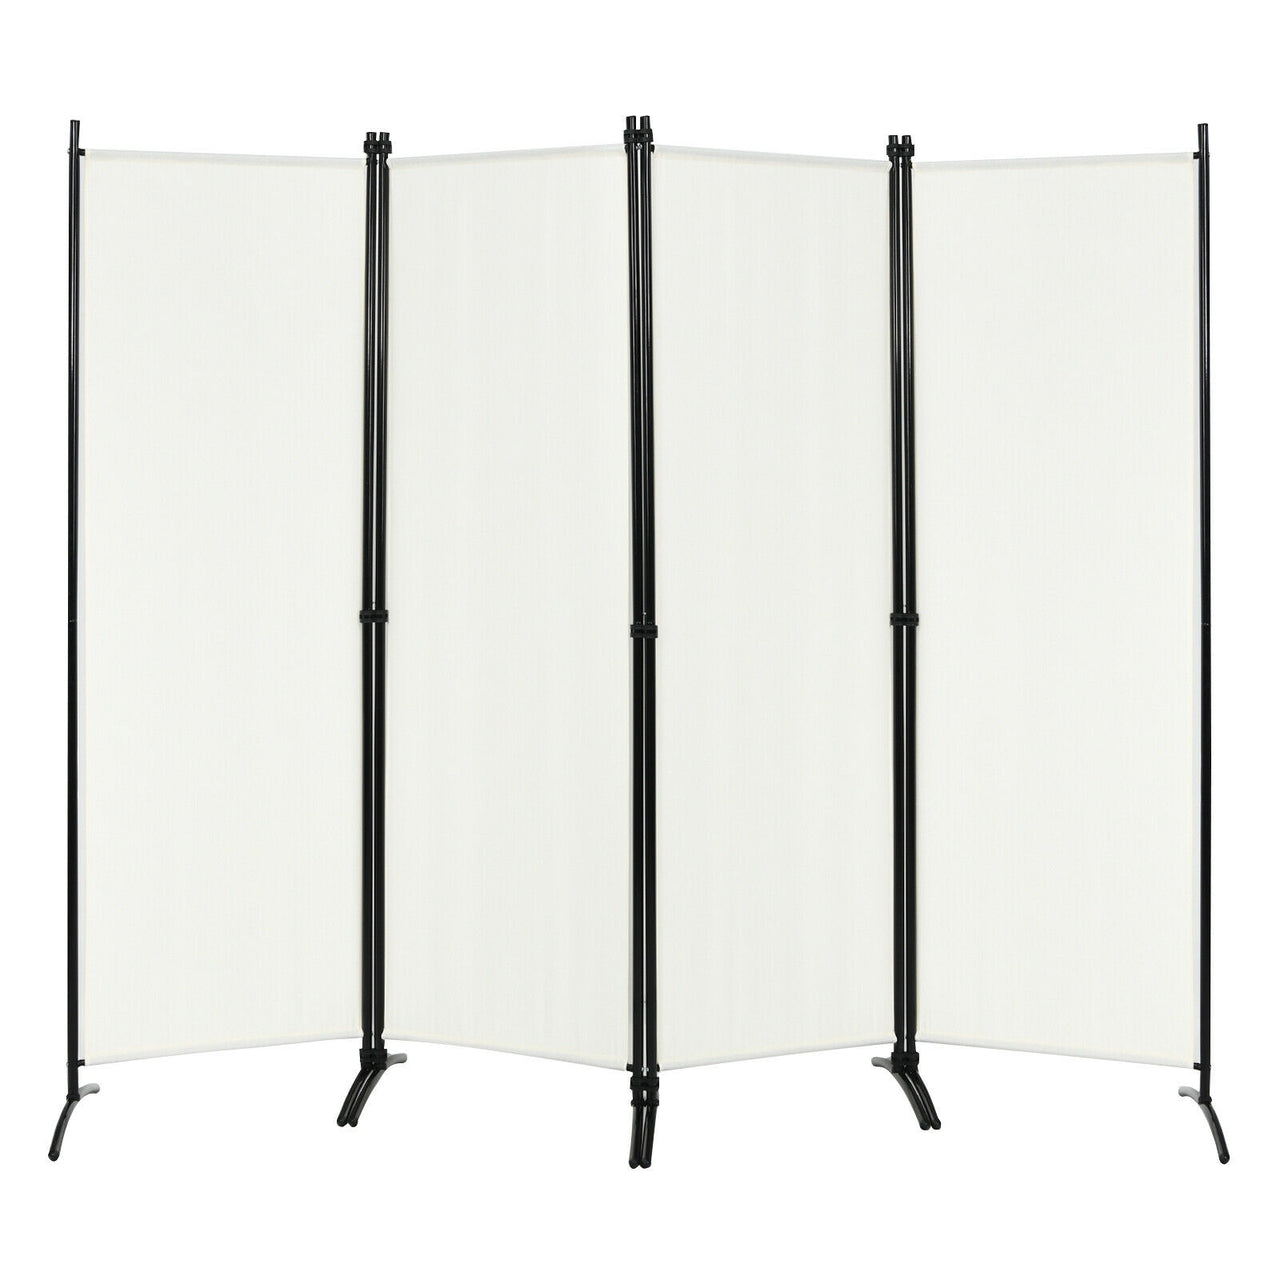 5.6 Feet 4 Panel Room Divider with Steel Frame - Gallery View 1 of 10